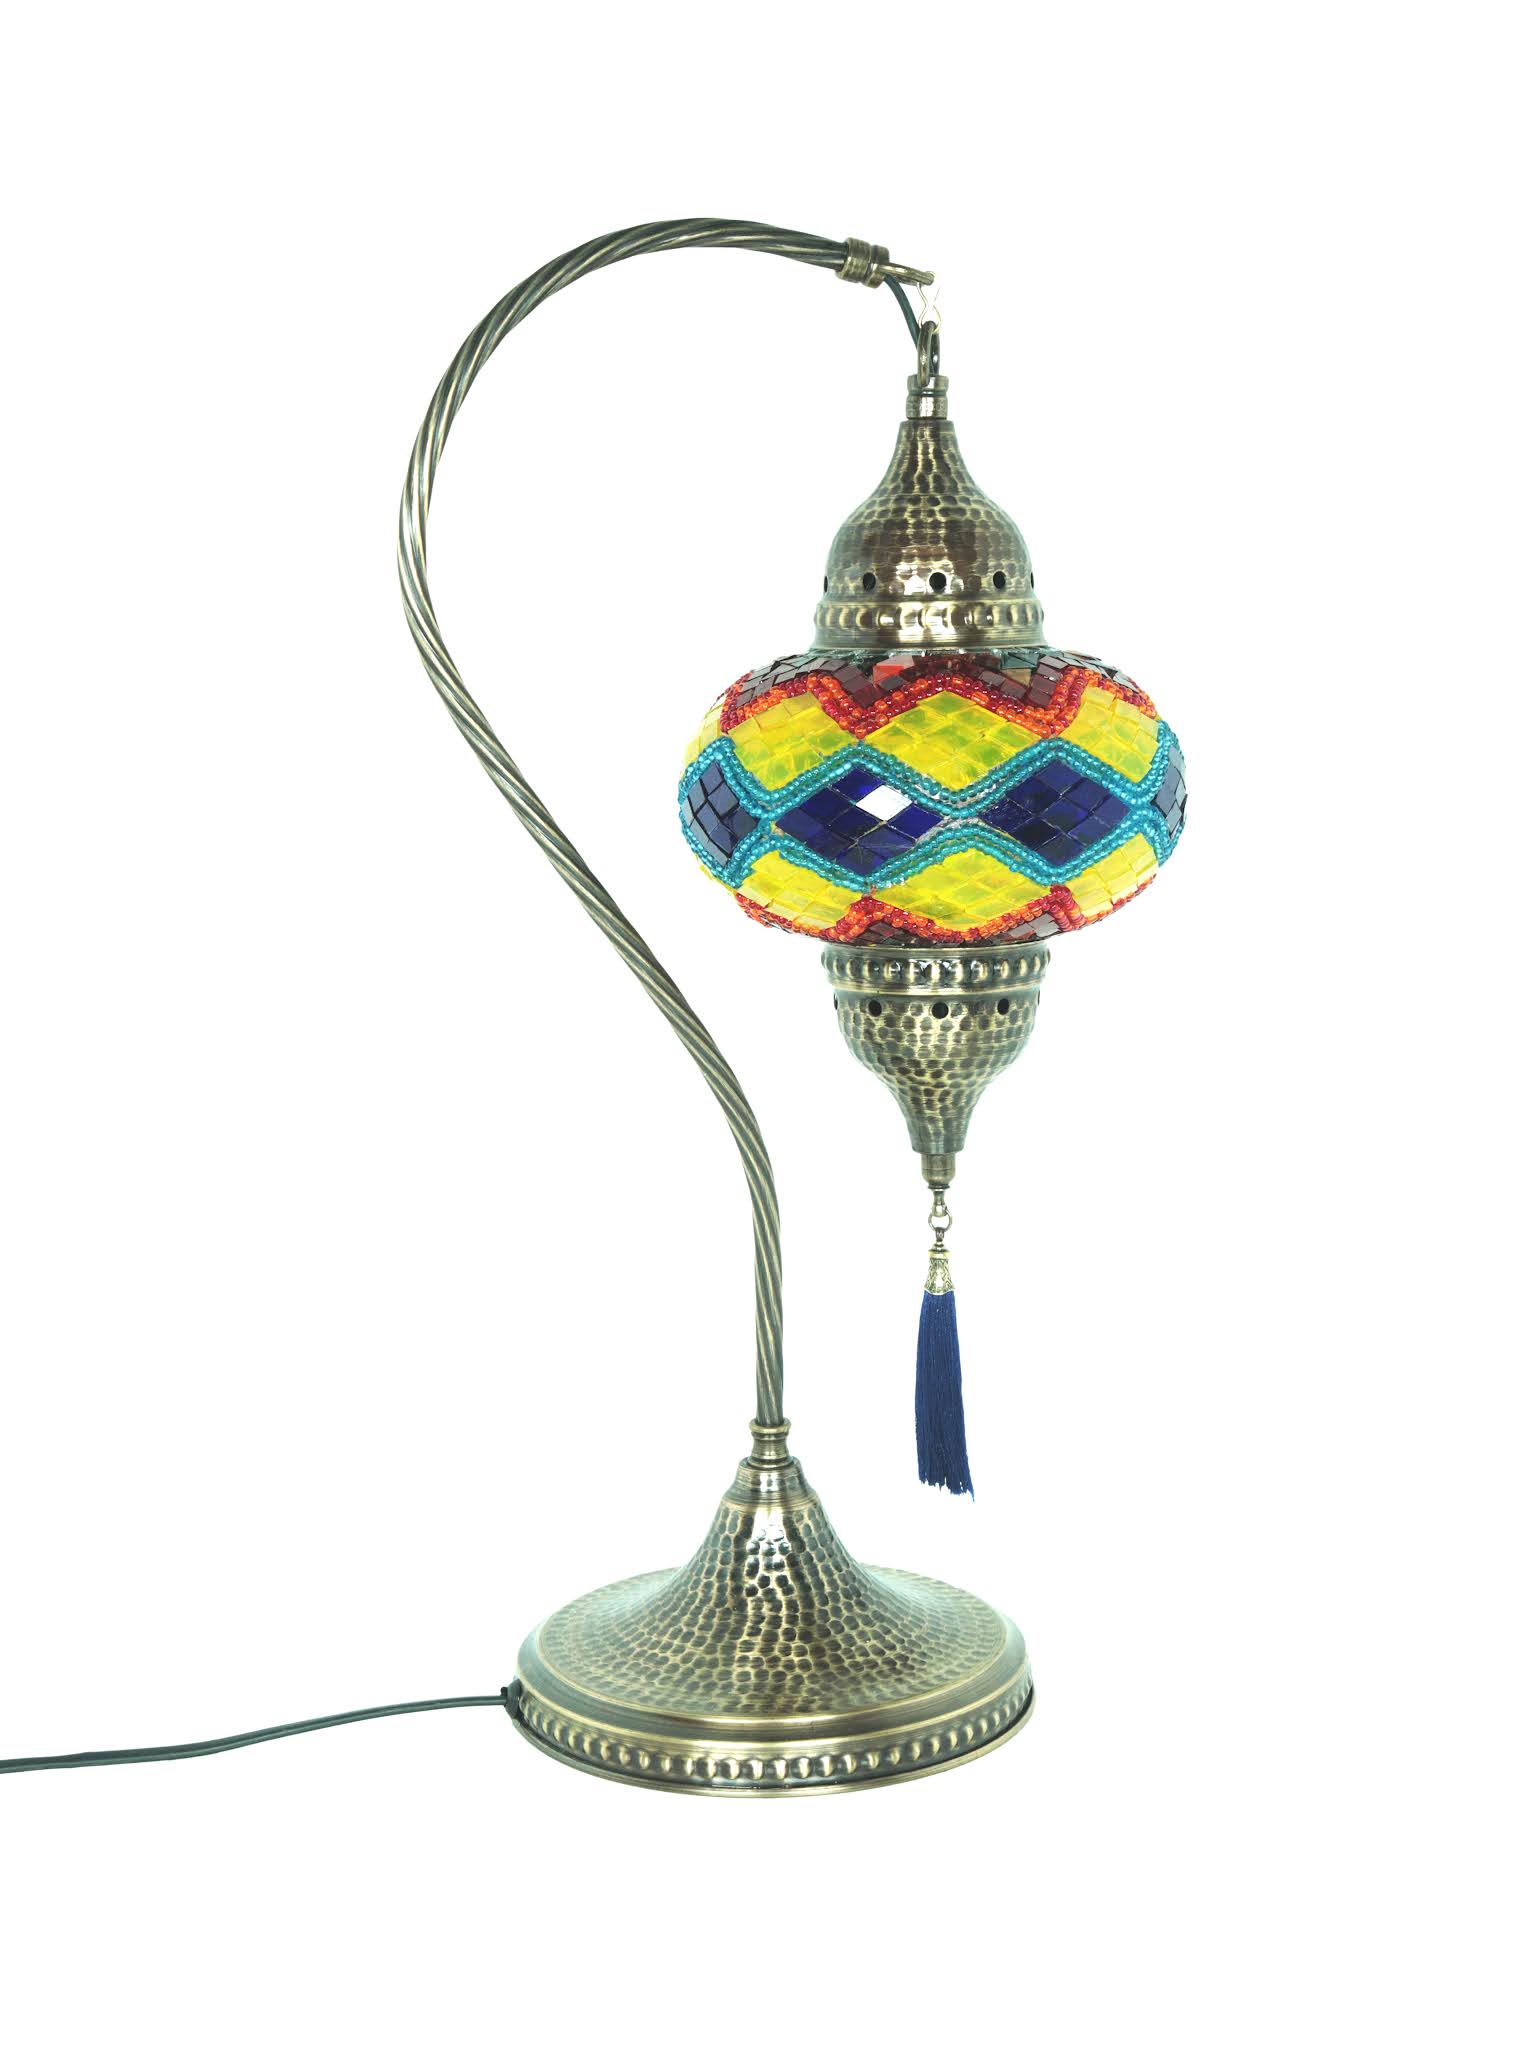 Turkish Mosaic Table Lamp Colorfully Lampshade Bedside Desk Light